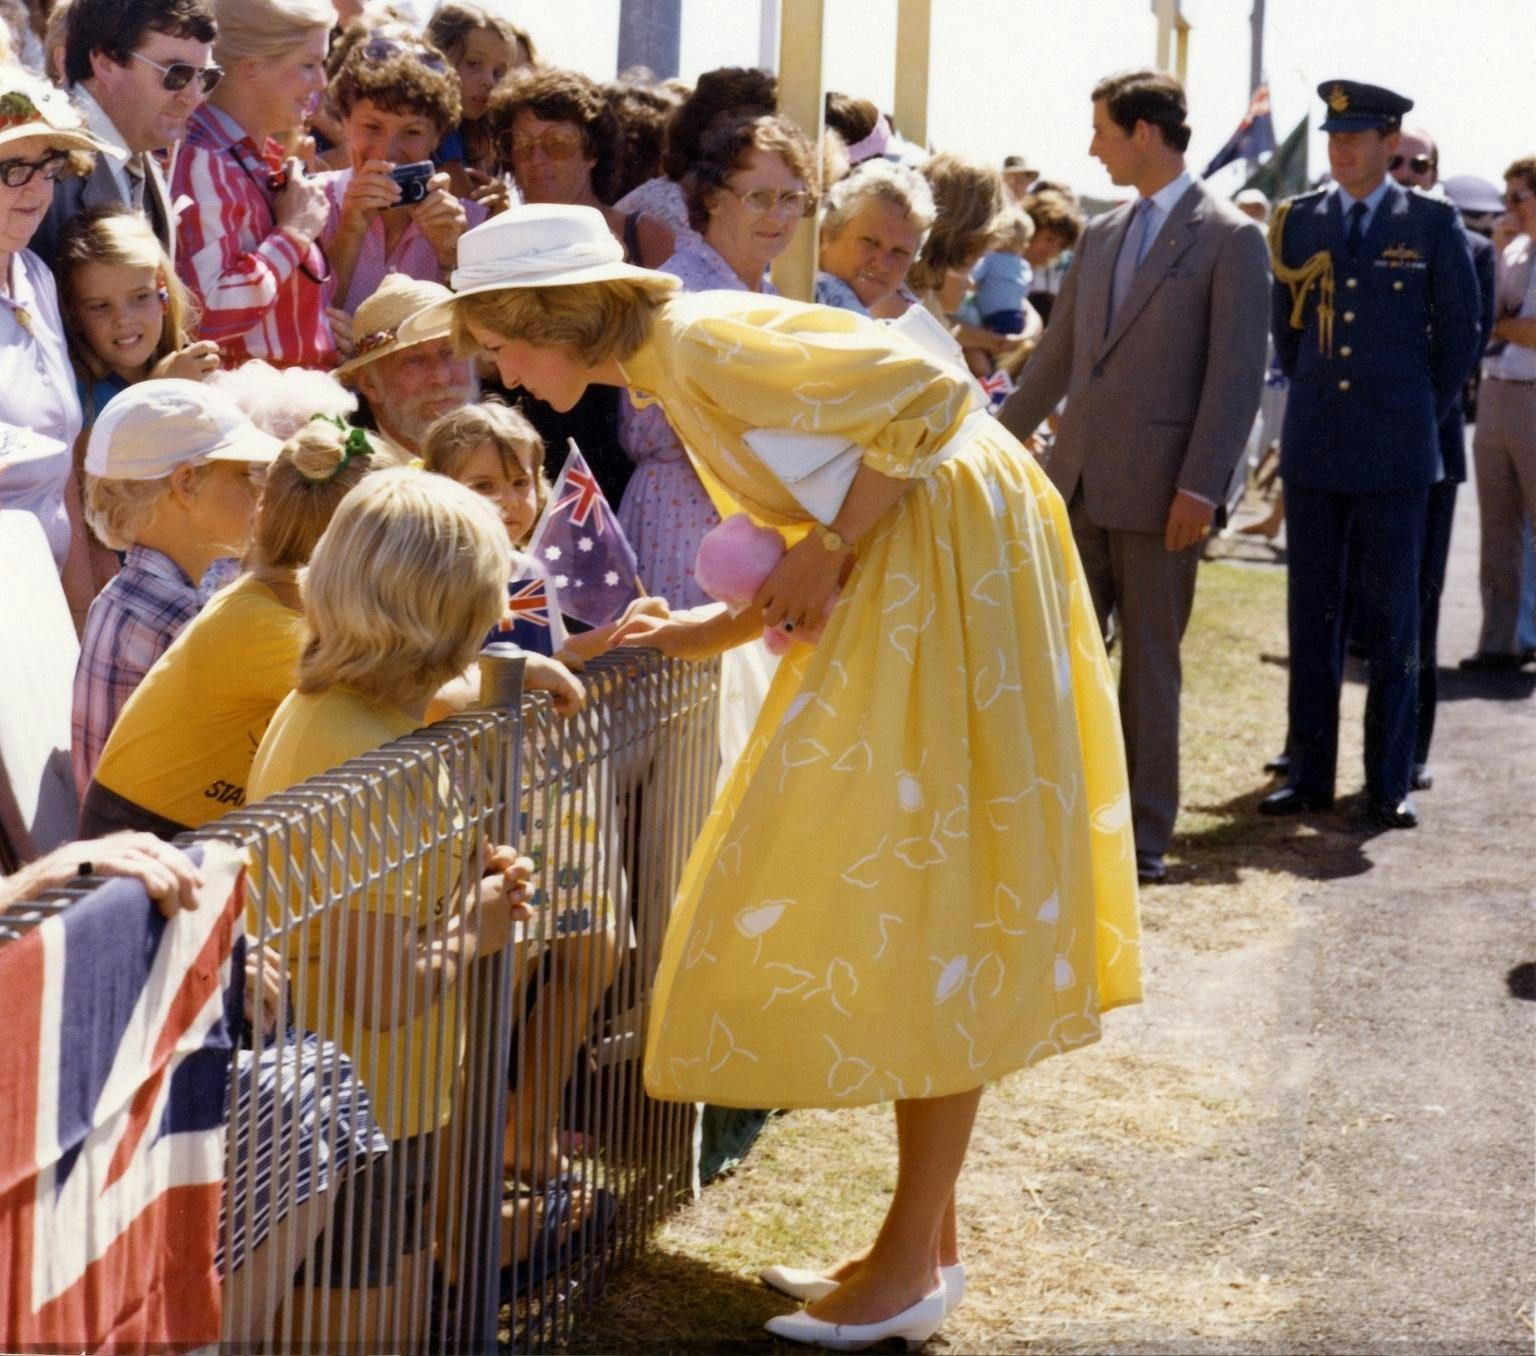 Diana is wearing a yellow dress and white hat. She is outside and leaning over a fence talking to children while crowds of adults watch on. Prince Charles is in the background also taking to crowds behind a fence